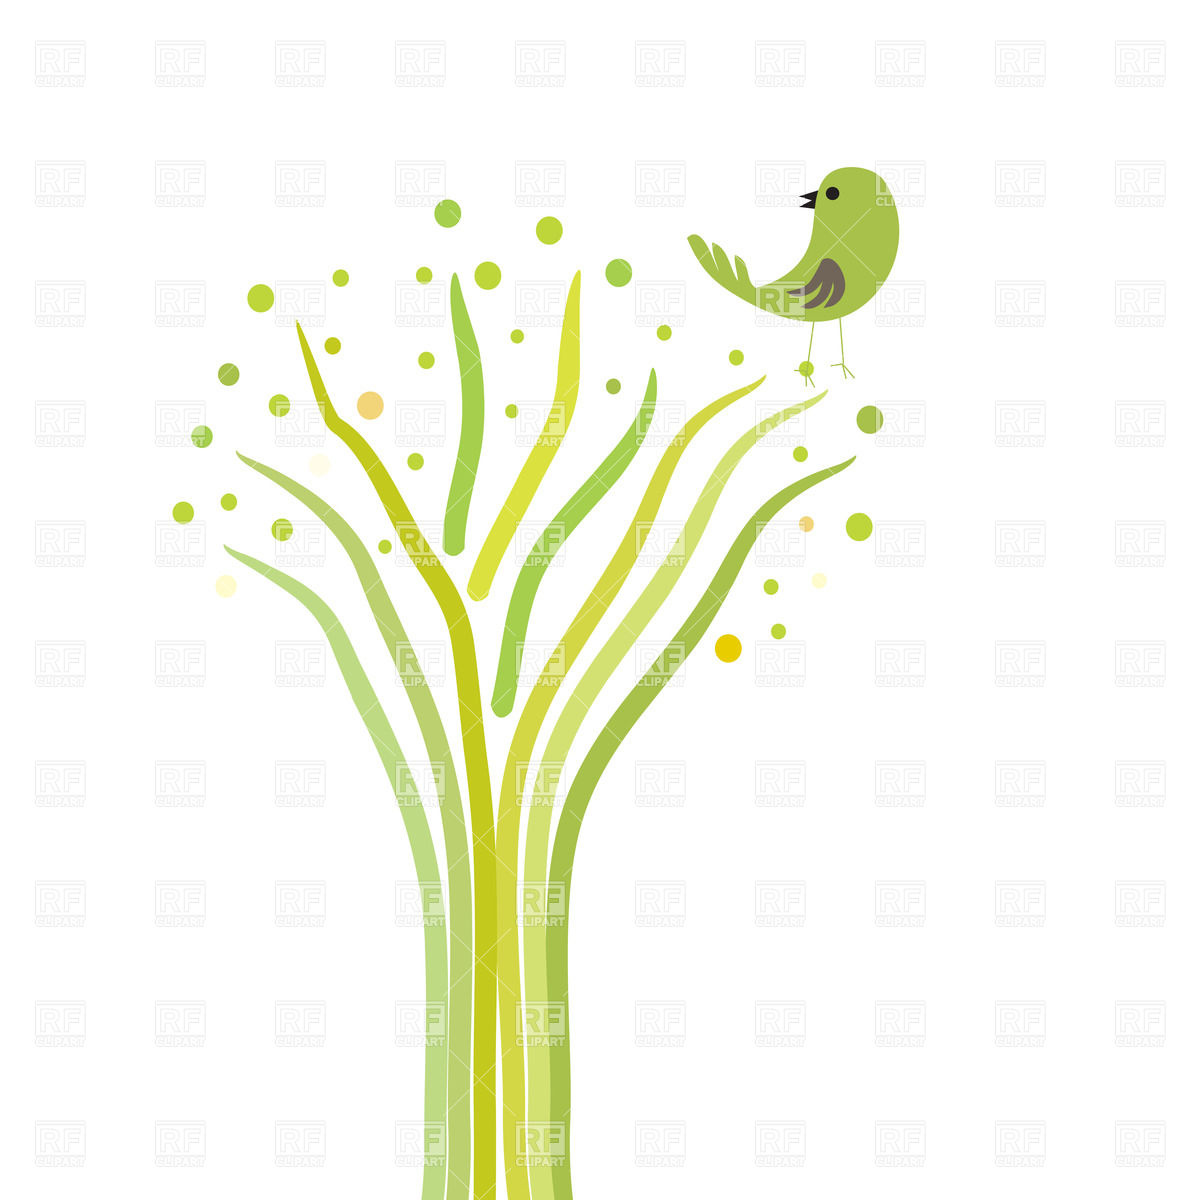 Abstract Stylized Spring Tree And Birds 21491 Download Royalty Free